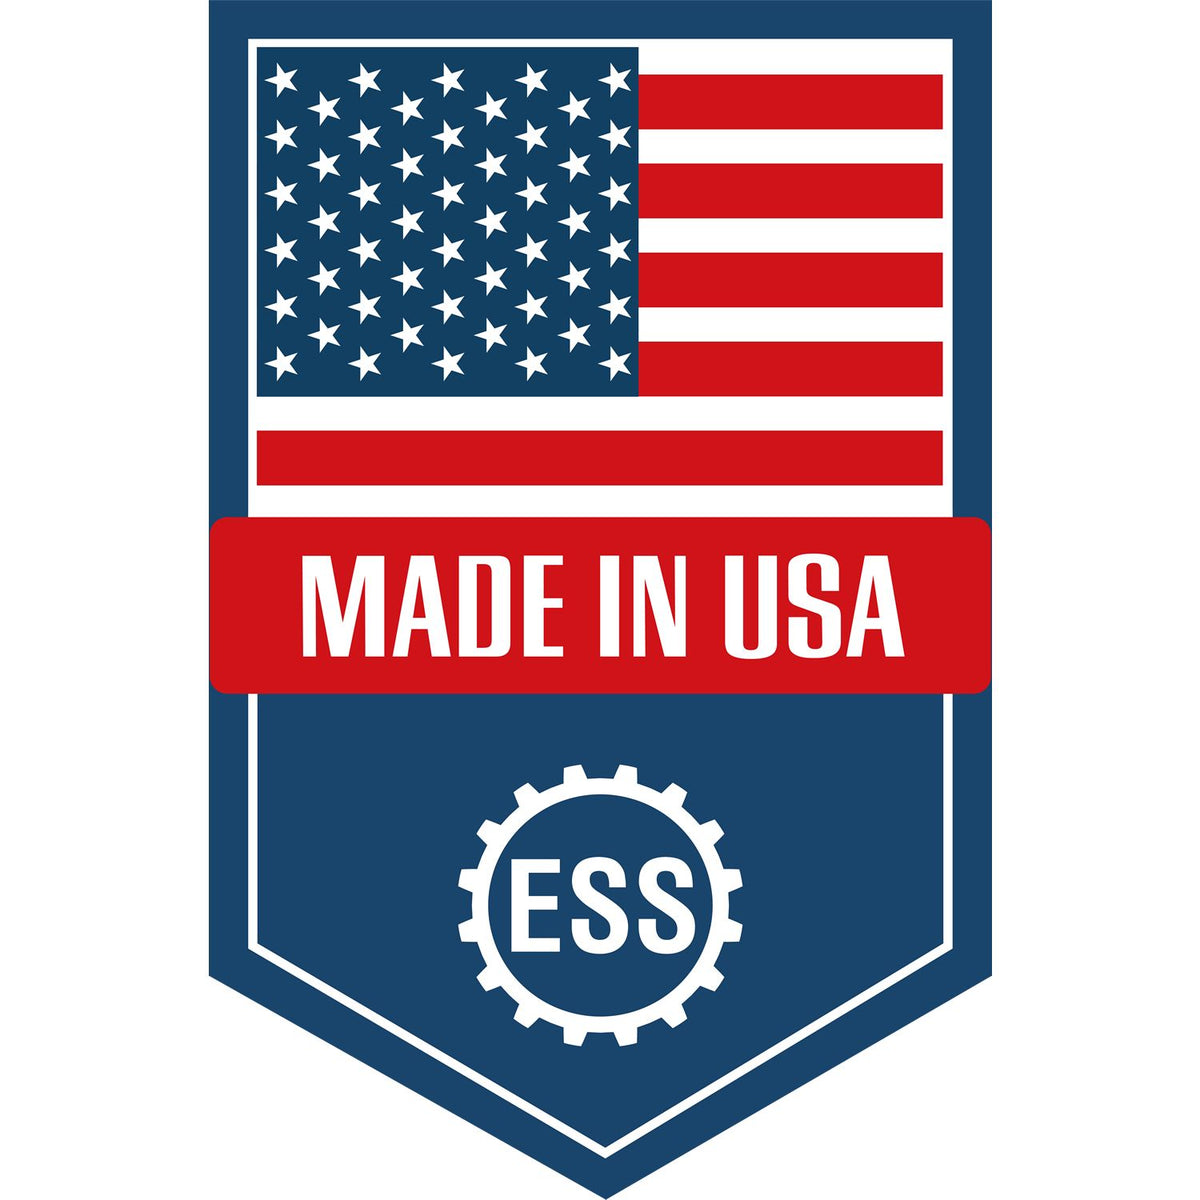 Custom Rubber Stamp Made in USA from ESS